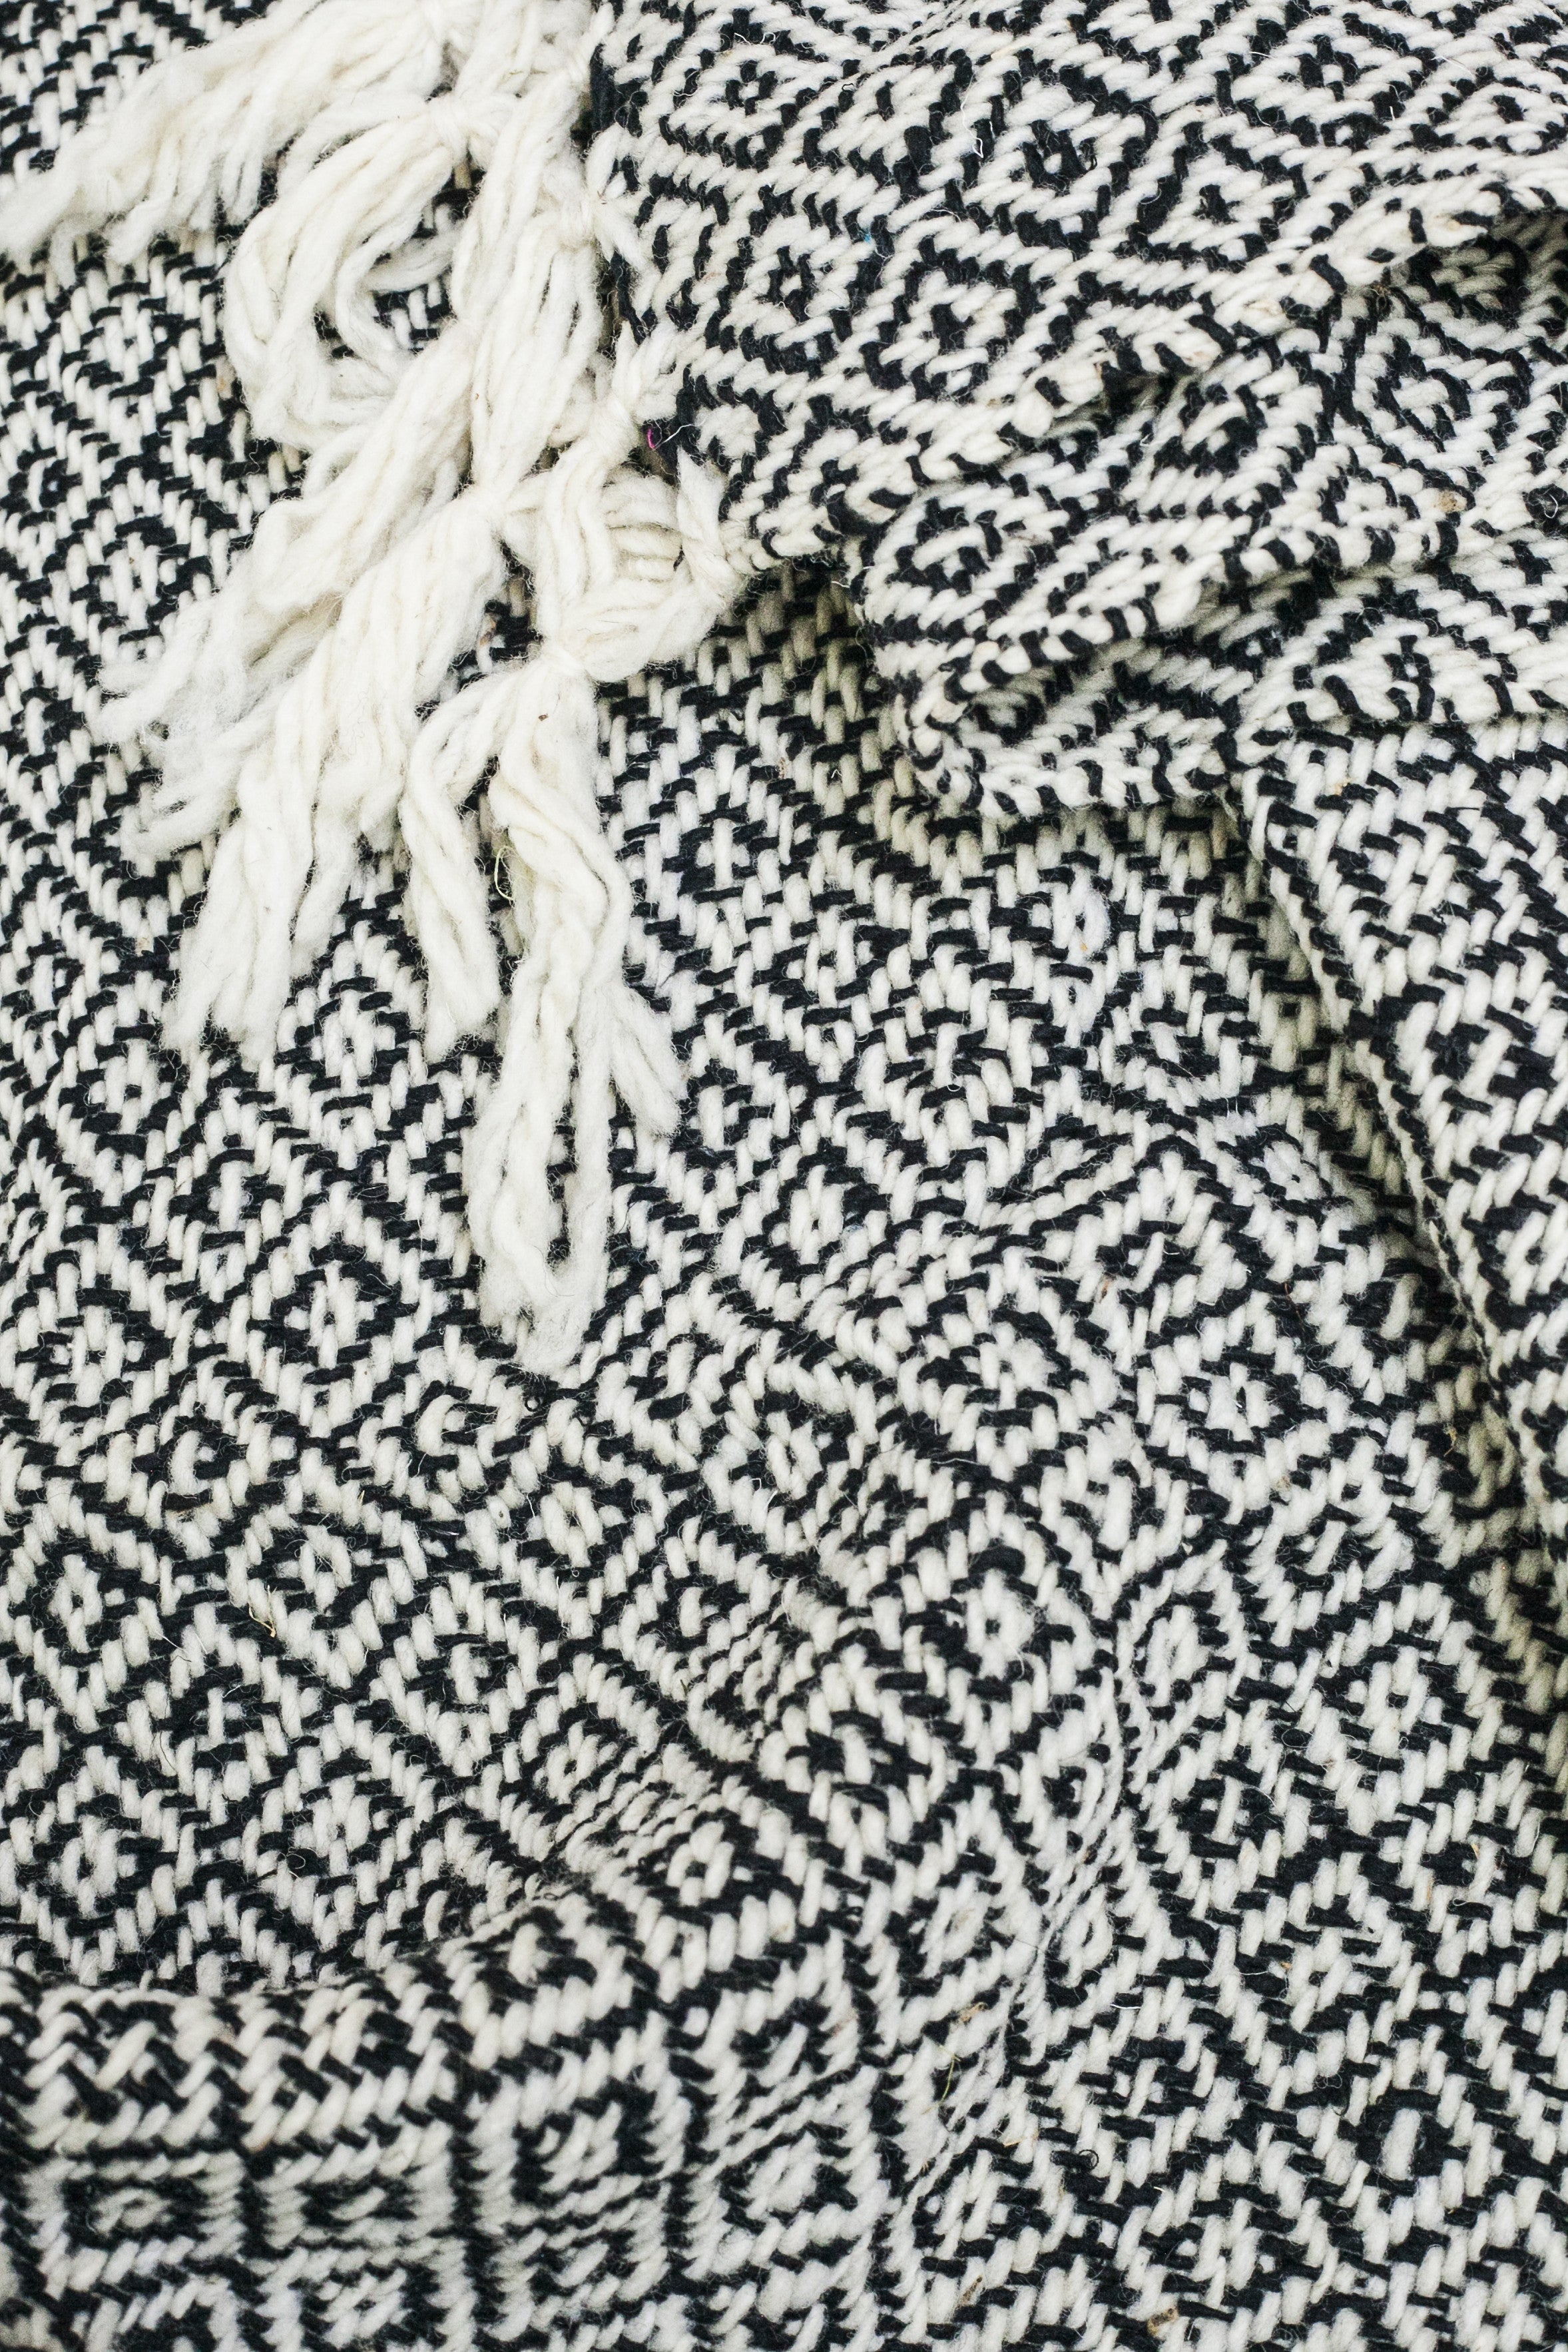 Detail of black and white diamond weaving and tied tassels from a wool throw blanket